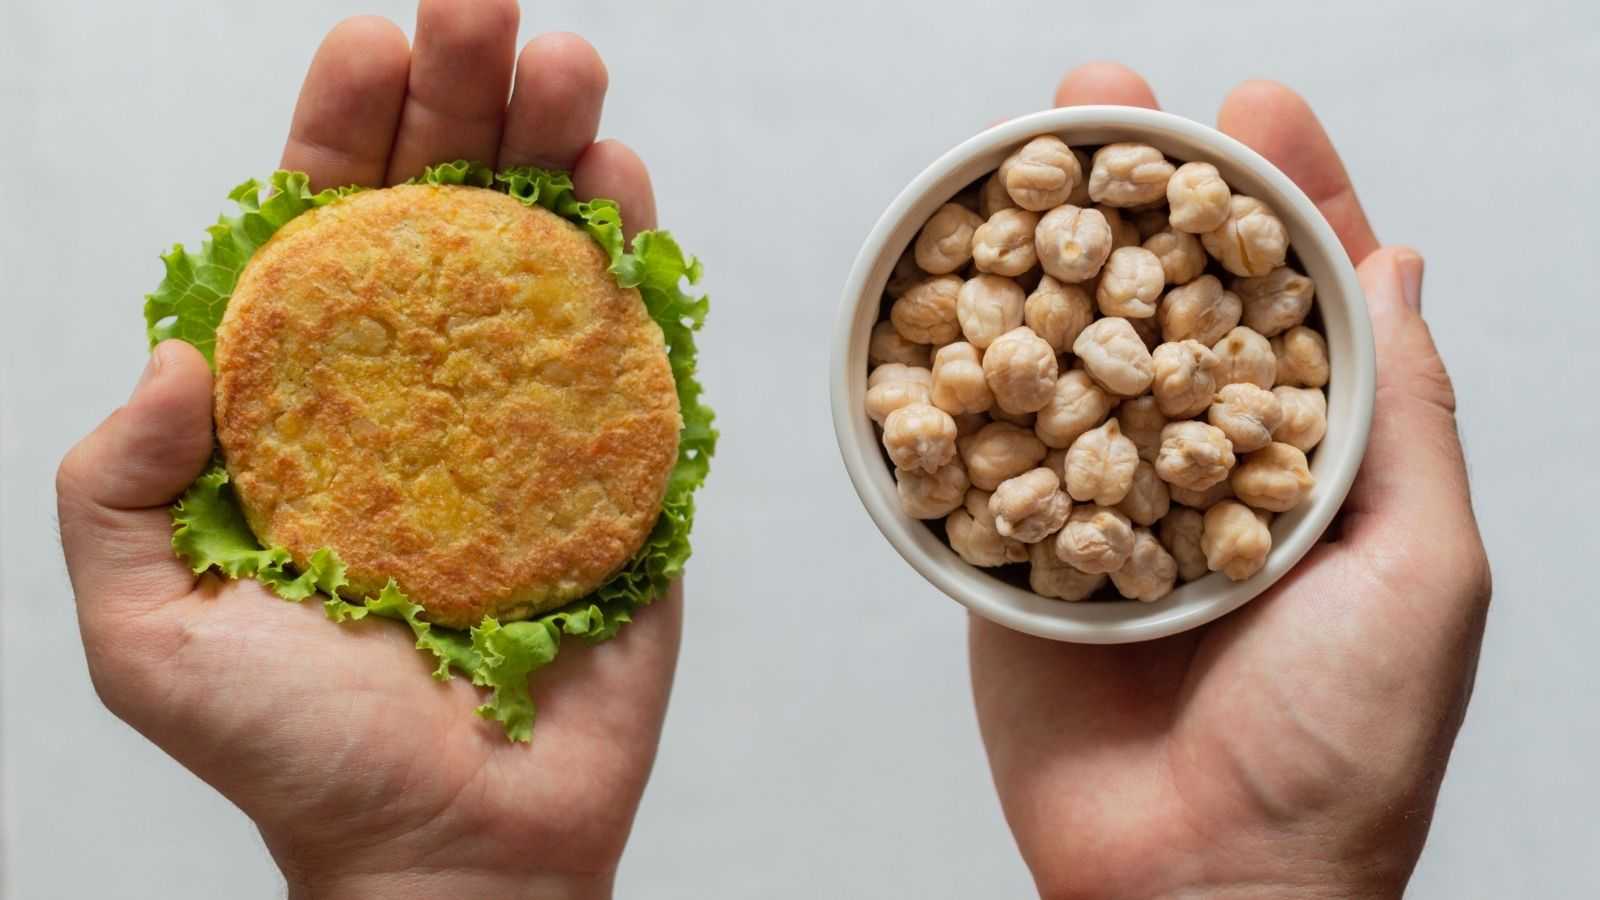 In one hand, a cutlet and a leaf of lettuce, in the other a bowl full of nuts